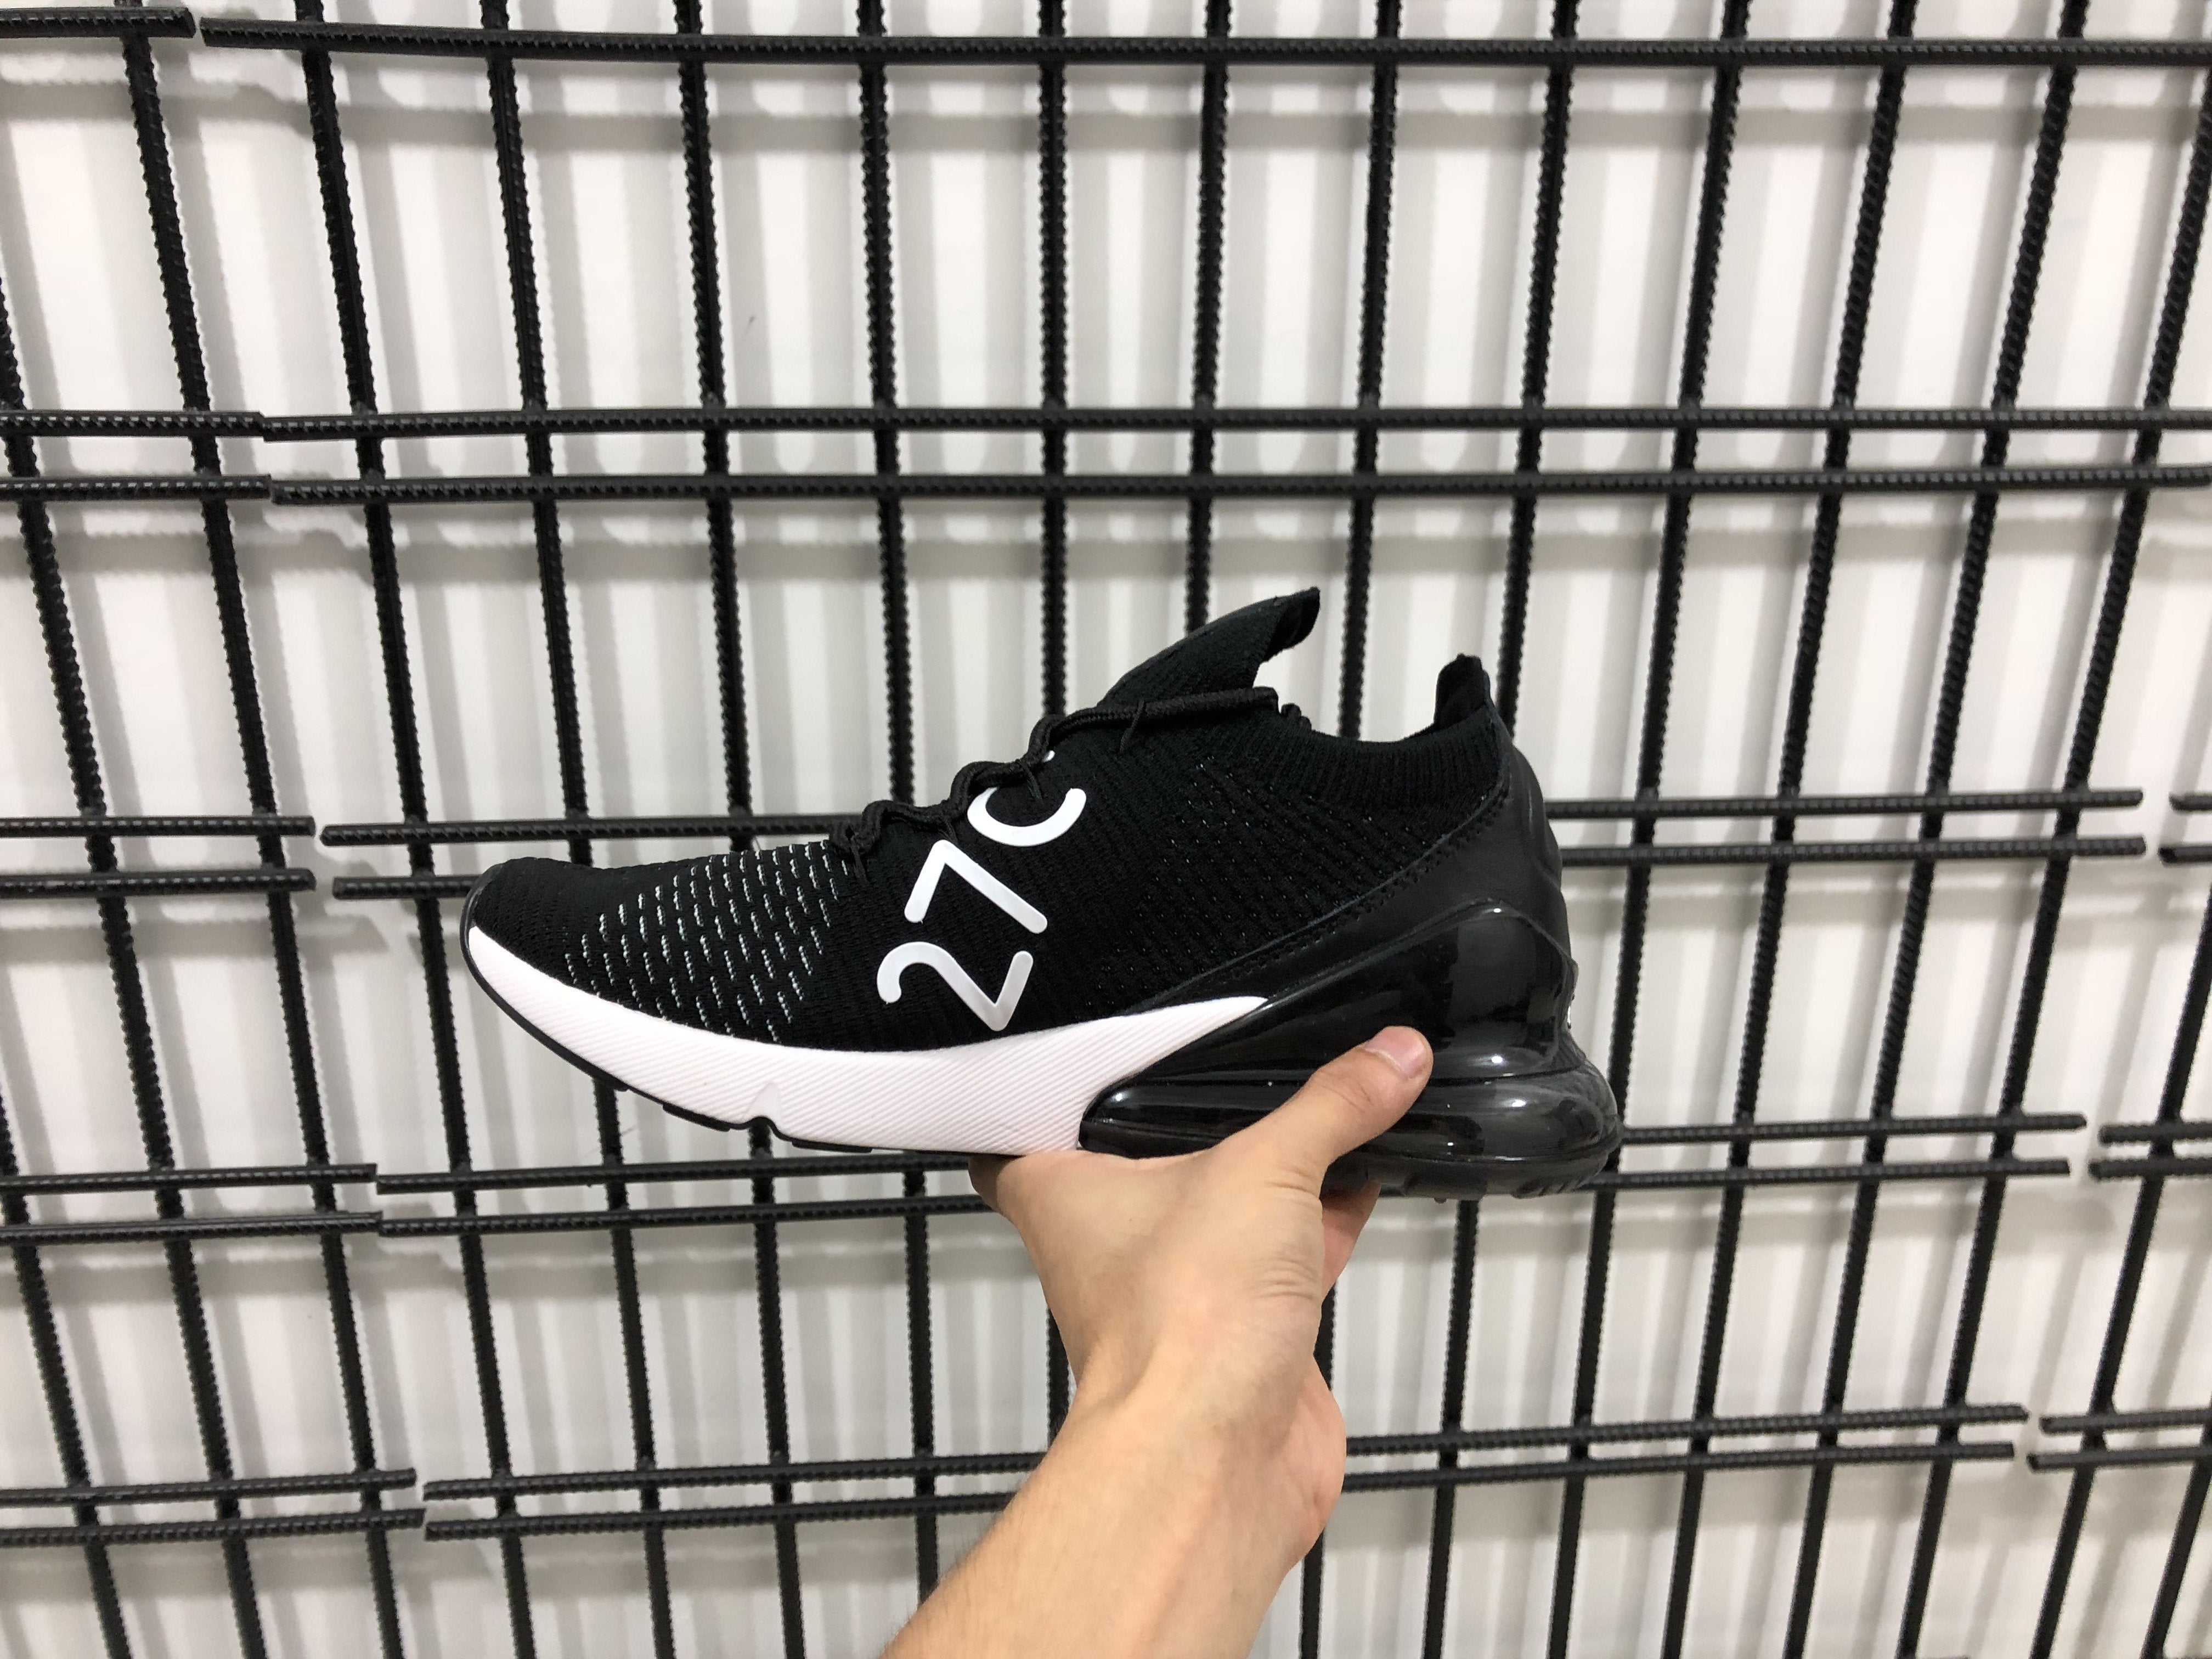 AM 270 Flyknit Black White Shoes Sneakers